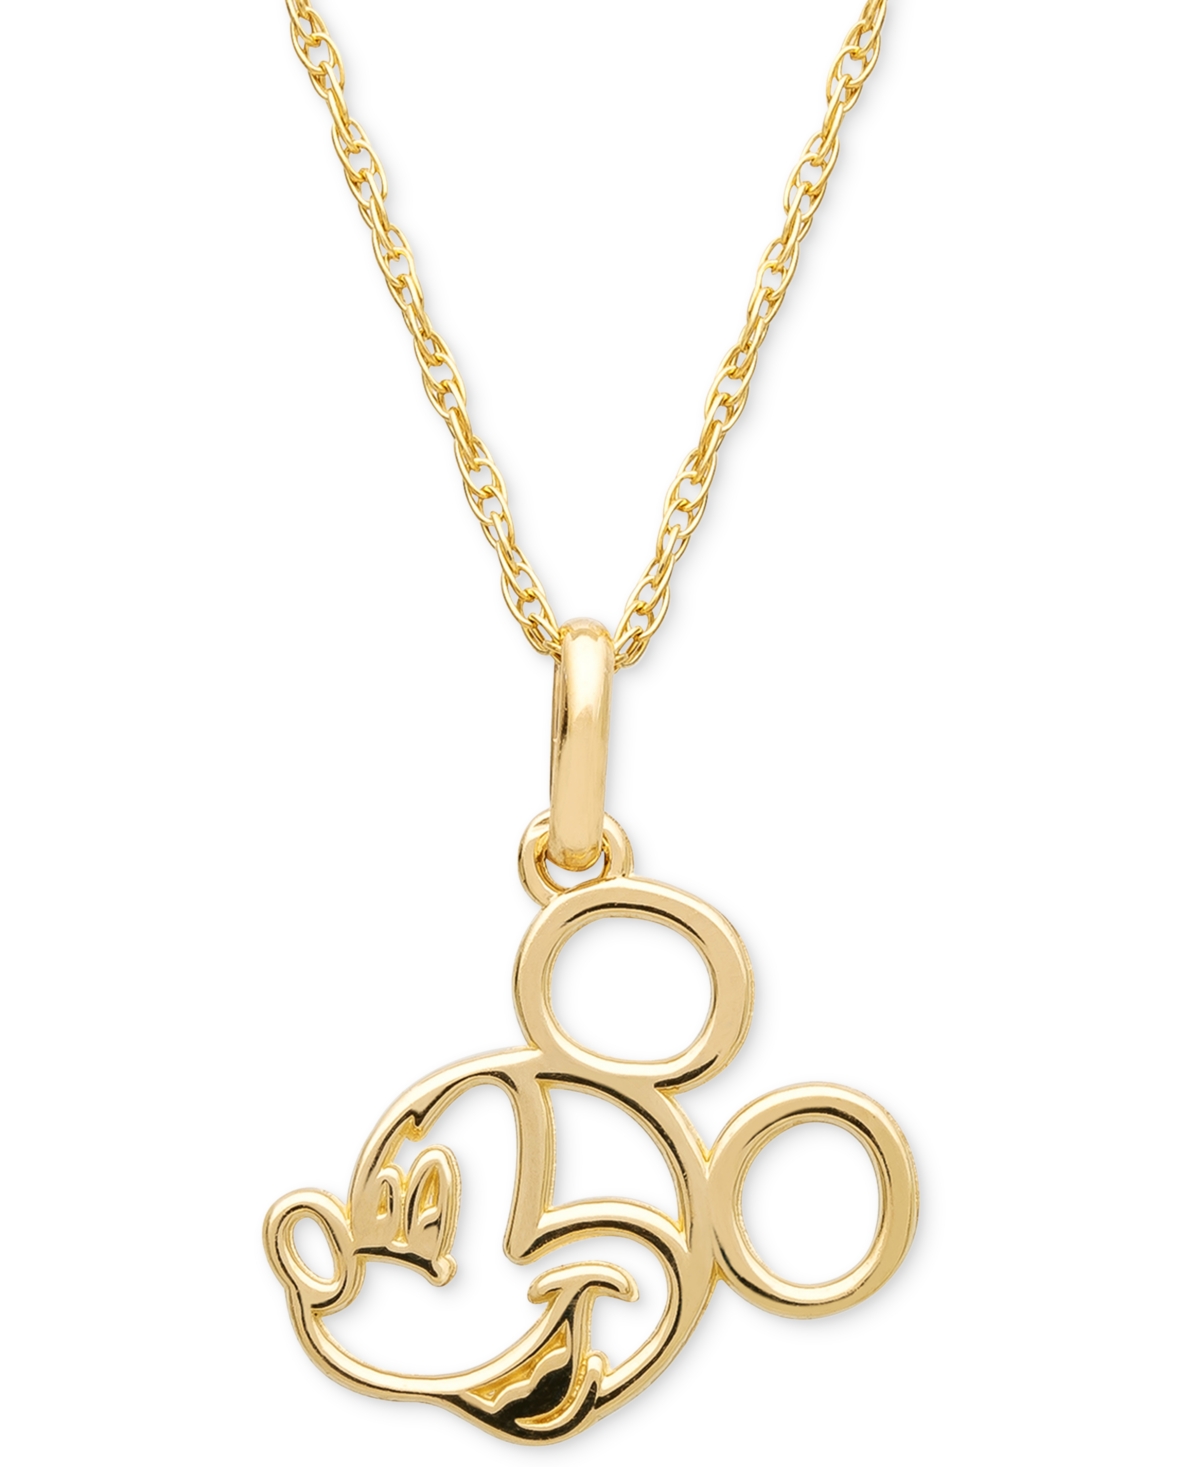 Children's Mickey Mouse 15" Pendant Necklace in 14k Gold - Yellow Gold